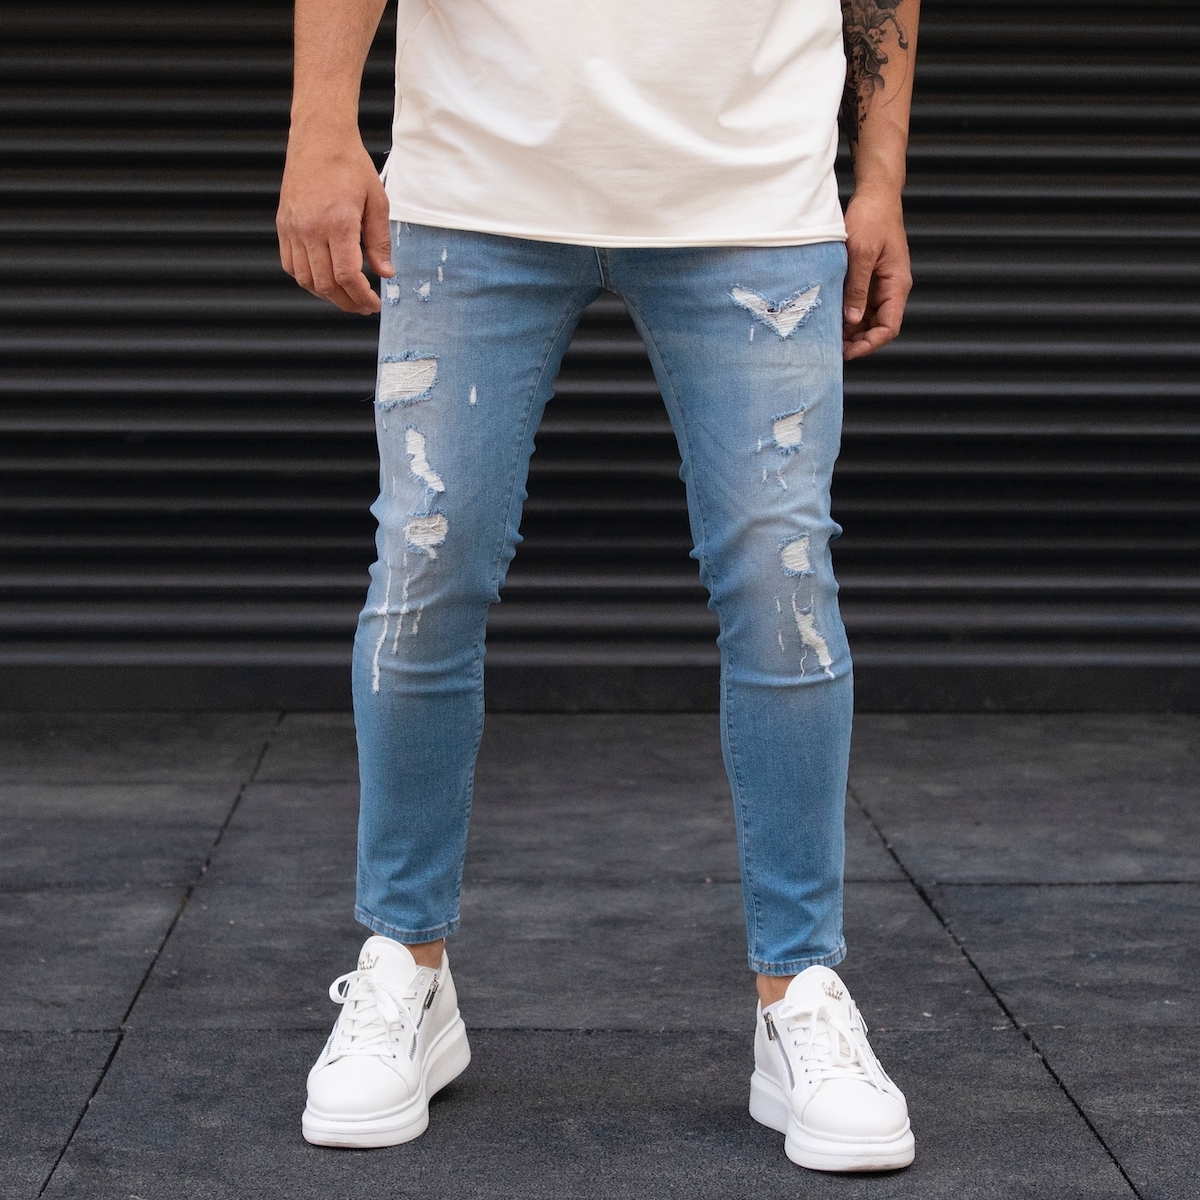 Men's Ripped Blue Jeans